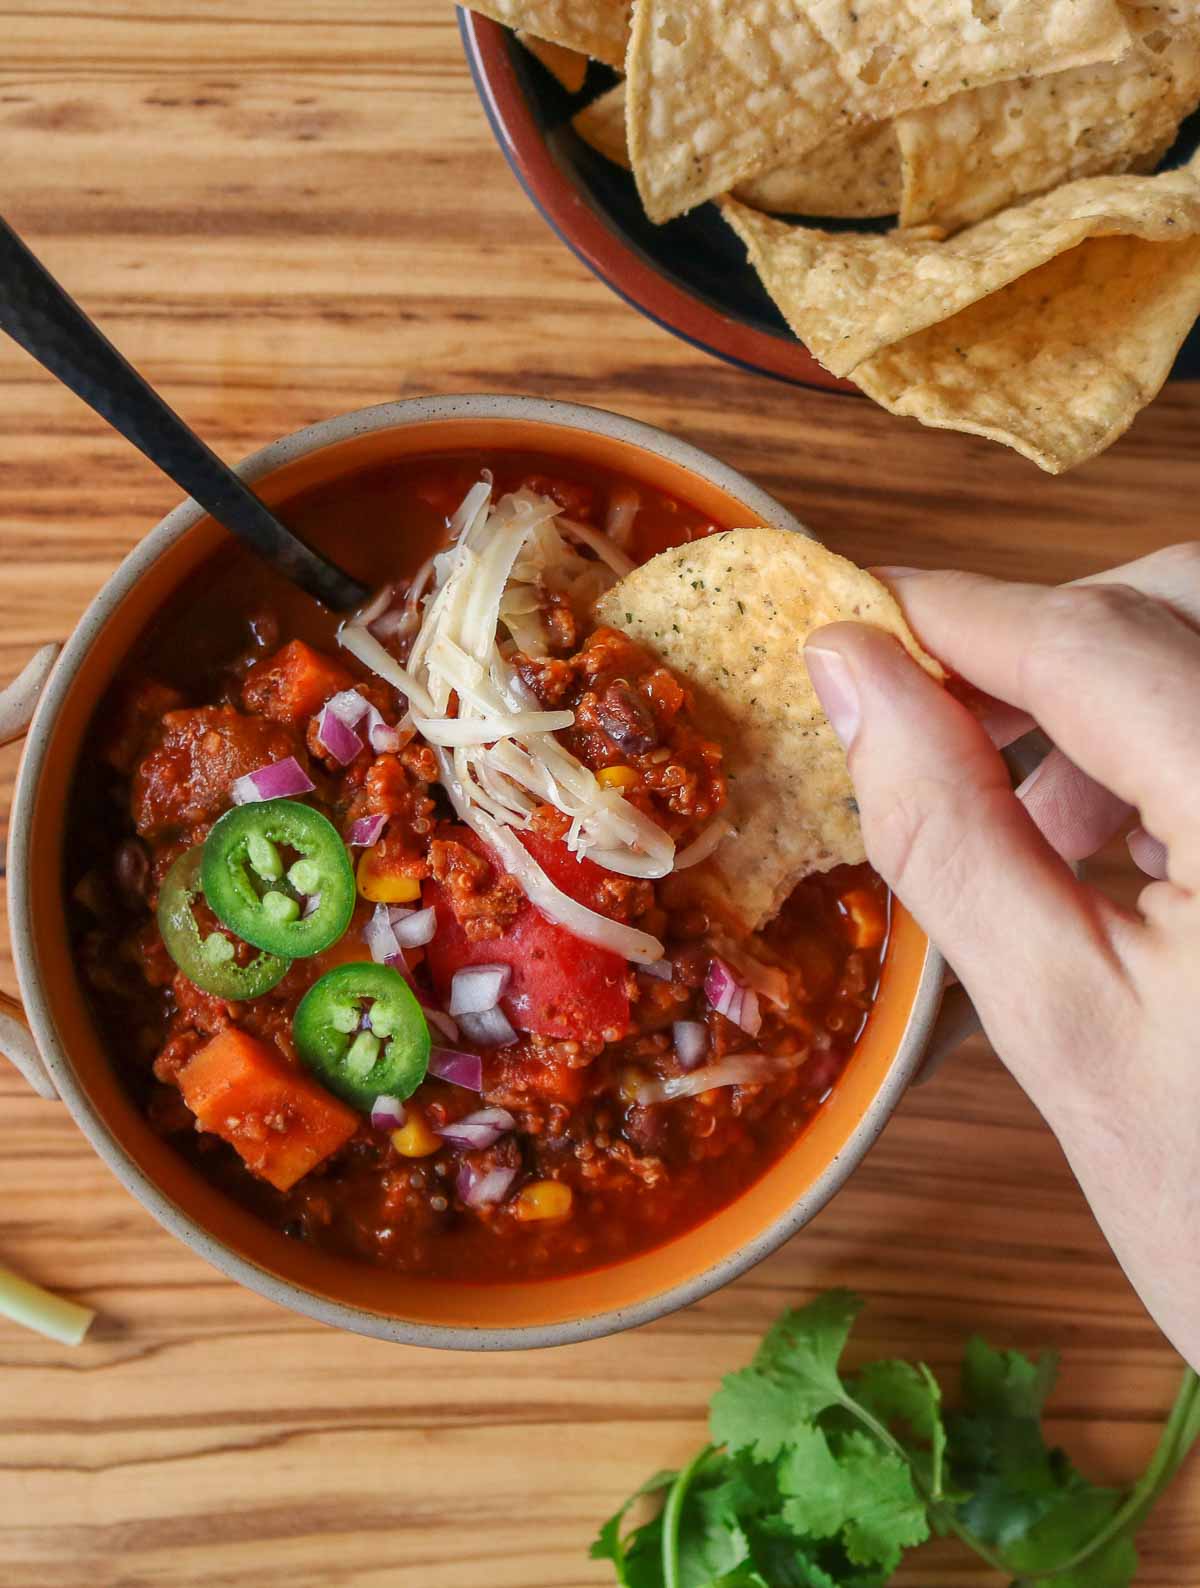 Hand holding a tortilla chip, dipping it into a bowl of chili.